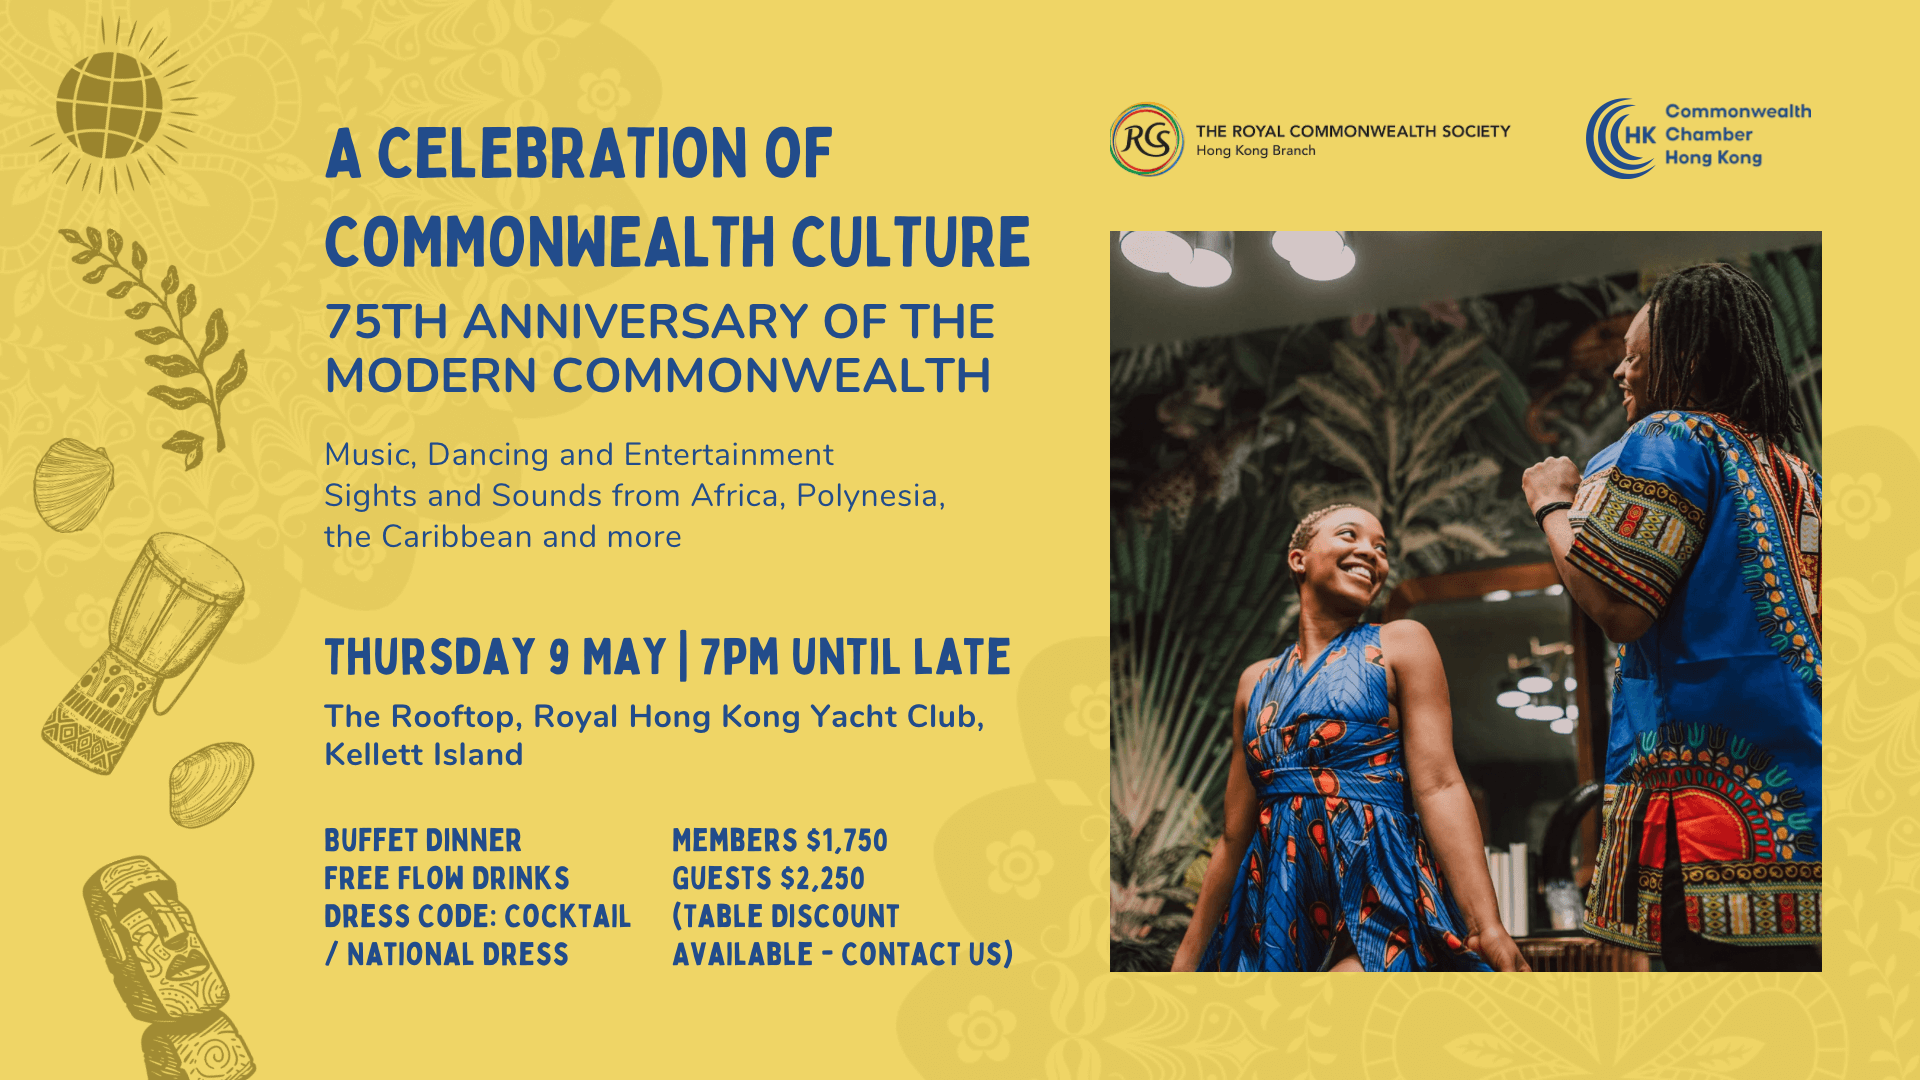 A Celebration of Commonwealth Culture